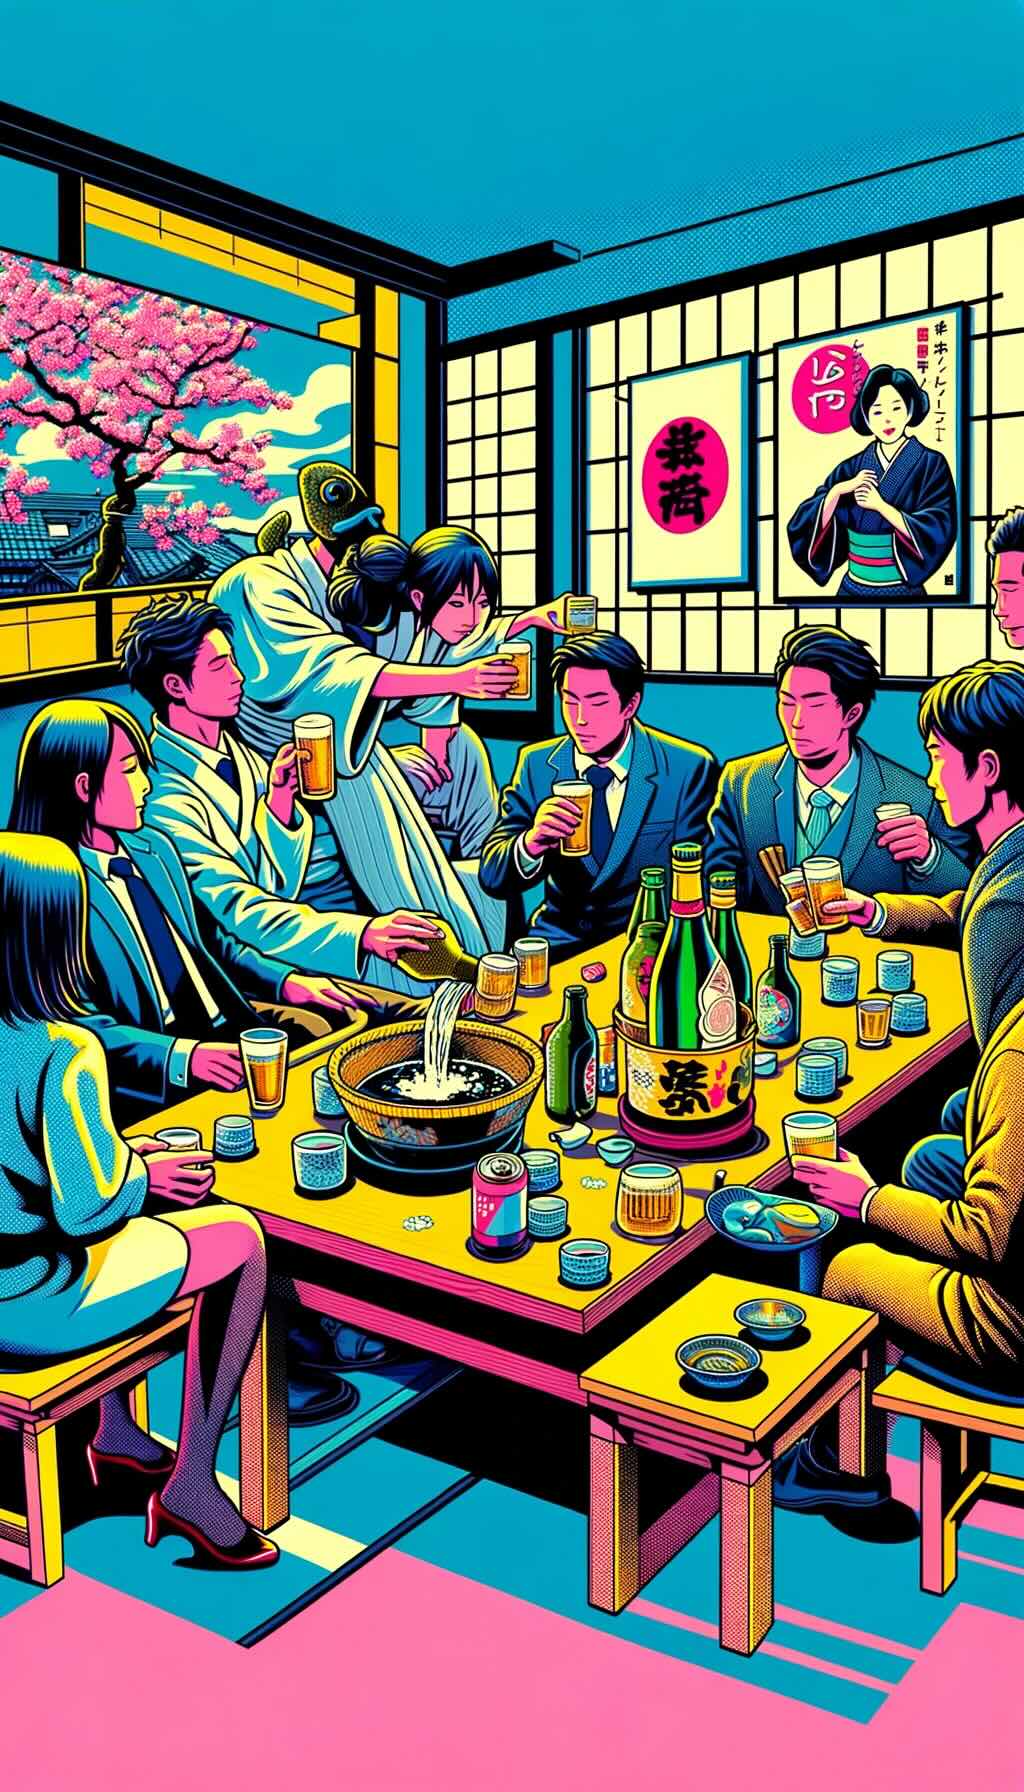 Role of alcohol in Japan's social life, the public perception of underage drinking, and the etiquette of drinking depicts scenes of nomikai, hanami with sake, and social gatherings with beer, sake, and shochu, highlighting alcohol as a facilitator of relationships and community. The societal disapproval of underage drinking and the strict enforcement of drinking laws are shown. Japanese drinking etiquette is illustrated, like waiting to say 'Kanpai', pouring drinks for others, and refilling glasses, emphasizing respect and camaraderie. The image conveys how drinking in Japan is a celebration of togetherness and respect.